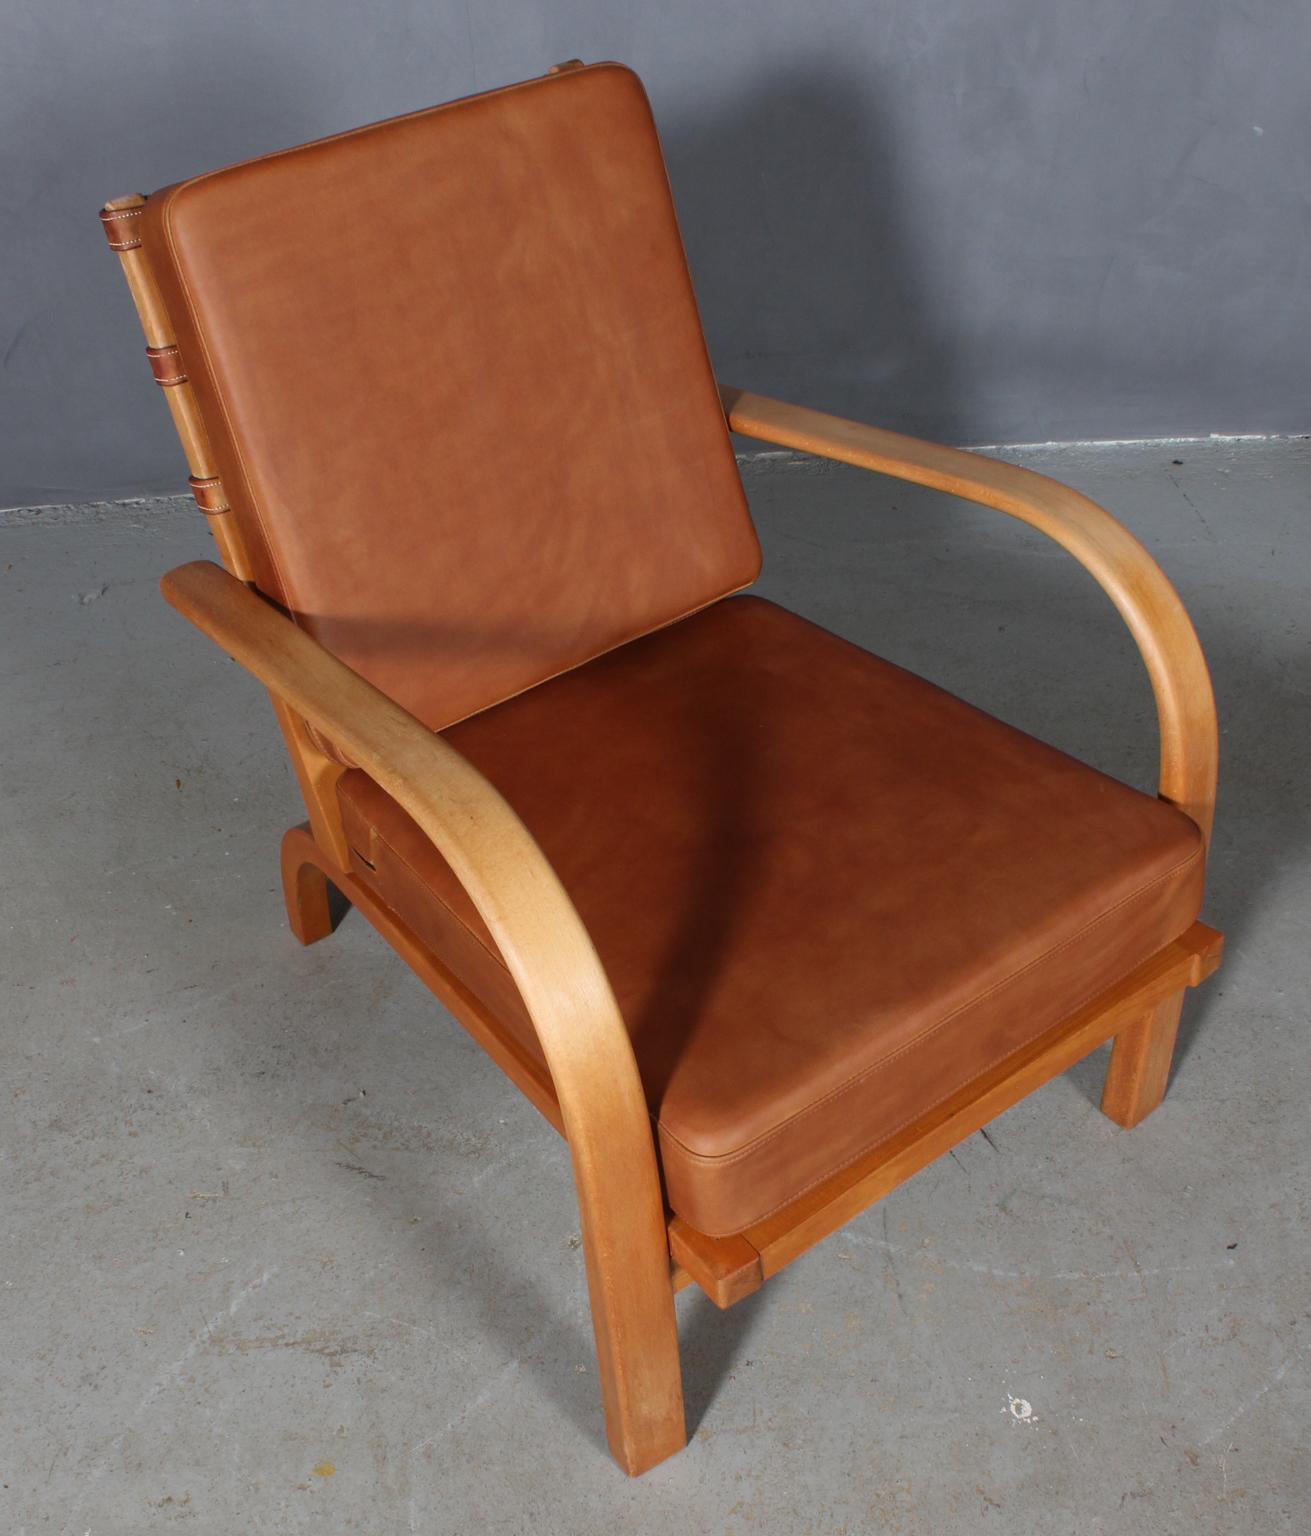 Ernst Heilmann Sevaldsen for Fritz Hansen lounge chair with frame of beech.

New upholstered with vintage tan aniline leather.

Original leather straps in the back.

Made by Fritz Hansen in the 1930s.